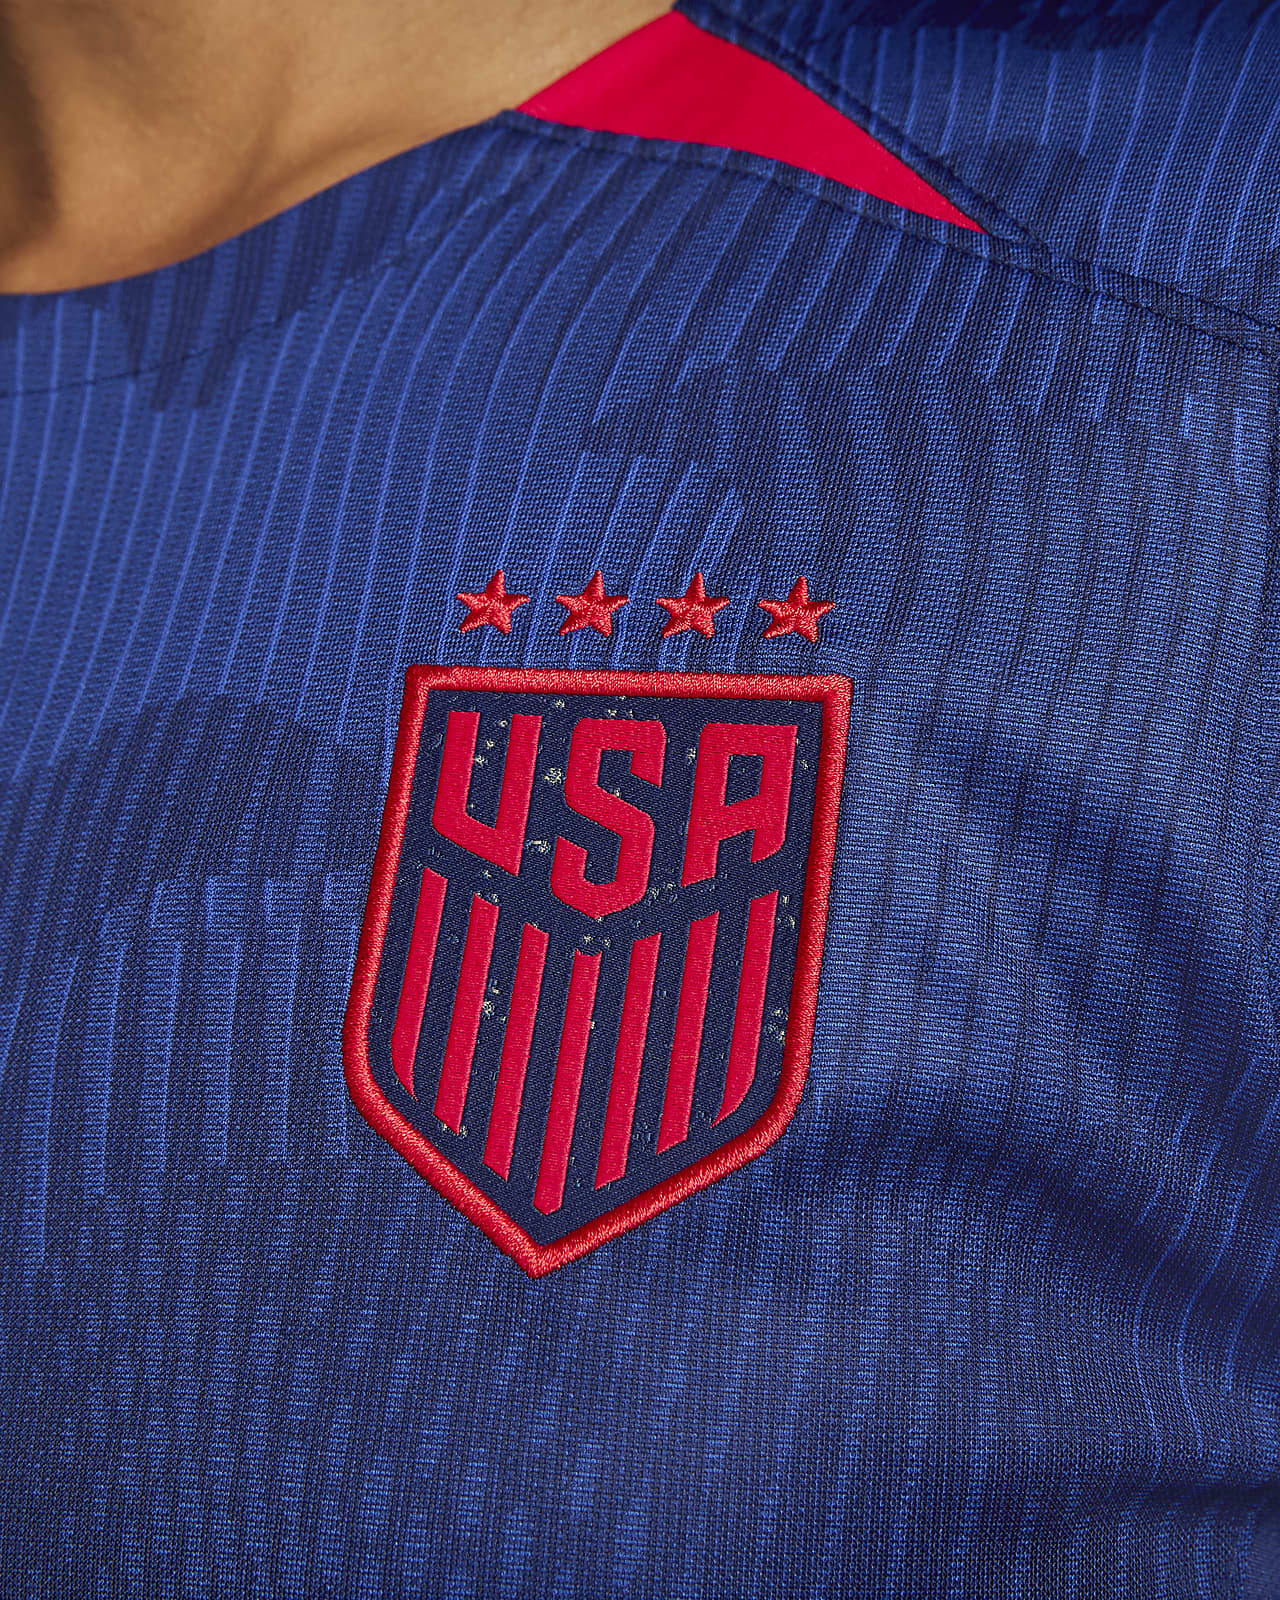 us national team jersey